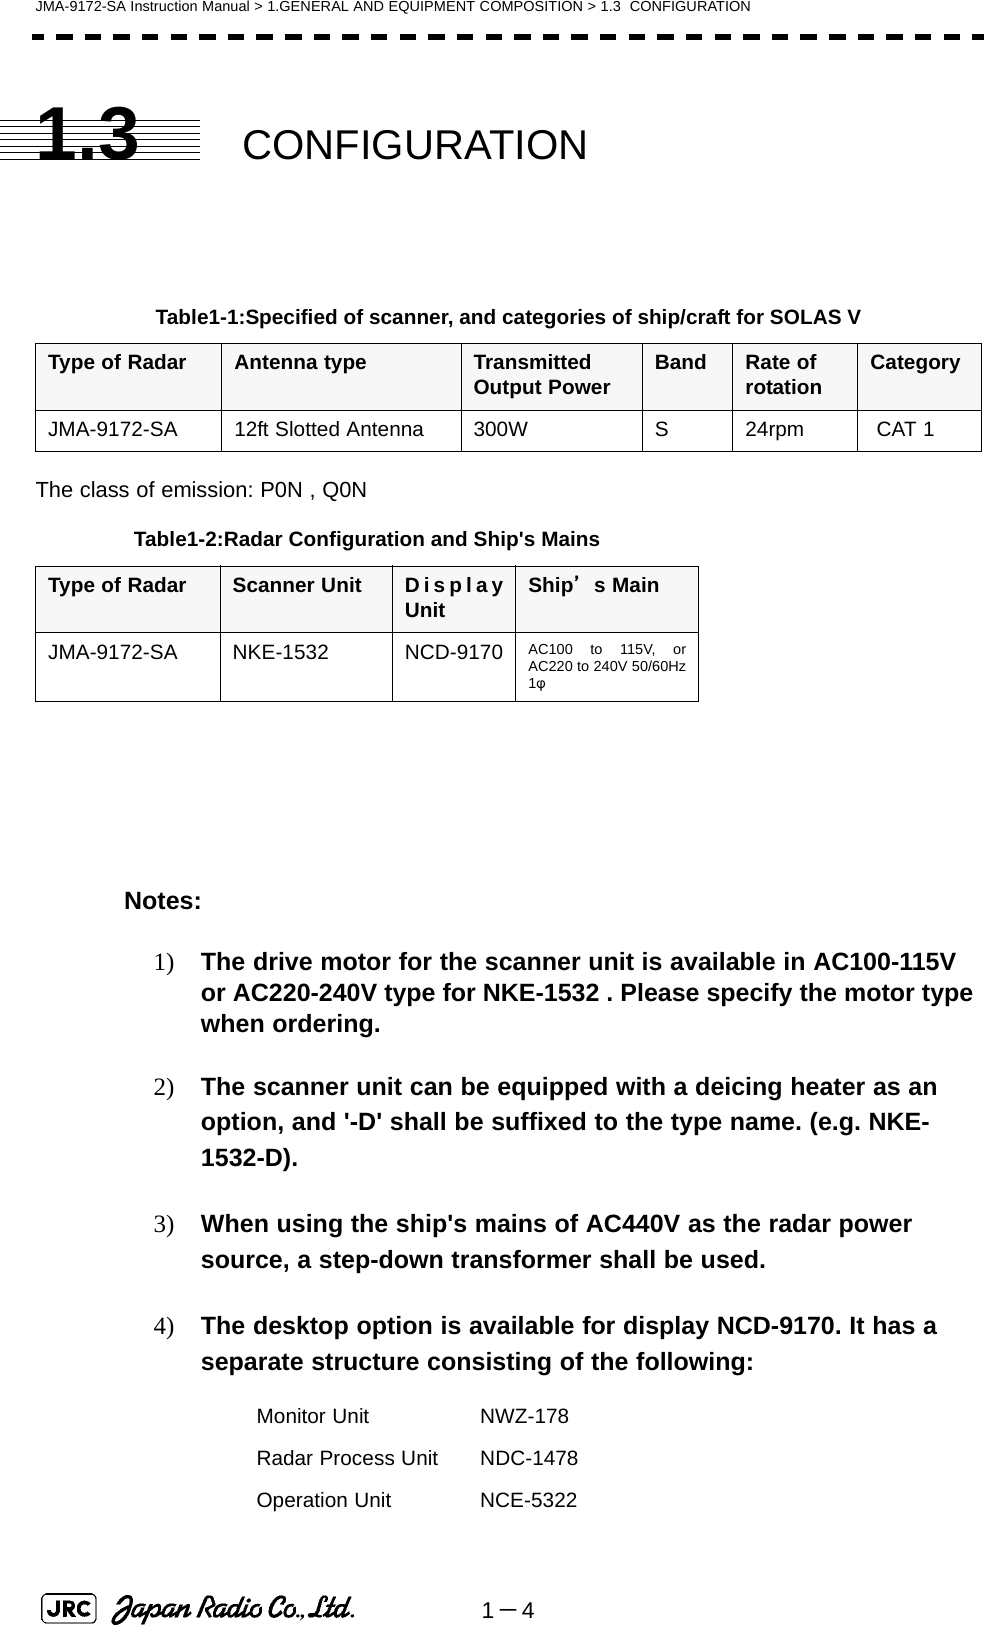 1－4JMA-9172-SA Instruction Manual &gt; 1.GENERAL AND EQUIPMENT COMPOSITION &gt; 1.3  CONFIGURATION1.3 CONFIGURATIONThe class of emission: P0N , Q0NNotes:1) The drive motor for the scanner unit is available in AC100-115V or AC220-240V type for NKE-1532 . Please specify the motor type when ordering.2) The scanner unit can be equipped with a deicing heater as an option, and &apos;-D&apos; shall be suffixed to the type name. (e.g. NKE-1532-D).3) When using the ship&apos;s mains of AC440V as the radar power source, a step-down transformer shall be used.4) The desktop option is available for display NCD-9170. It has a separate structure consisting of the following:Table1-1:Specified of scanner, and categories of ship/craft for SOLAS VType of Radar Antenna type Transmitted Output Power Band Rate of rotation CategoryJMA-9172-SA 12ft Slotted Antenna 300W S 24rpm  CAT 1Table1-2:Radar Configuration and Ship&apos;s MainsType of Radar Scanner Unit DisplayUnit Ship’s MainJMA-9172-SA NKE-1532 NCD-9170 AC100 to 115V, orAC220 to 240V 50/60Hz1φMonitor Unit NWZ-178Radar Process Unit NDC-1478Operation Unit NCE-5322